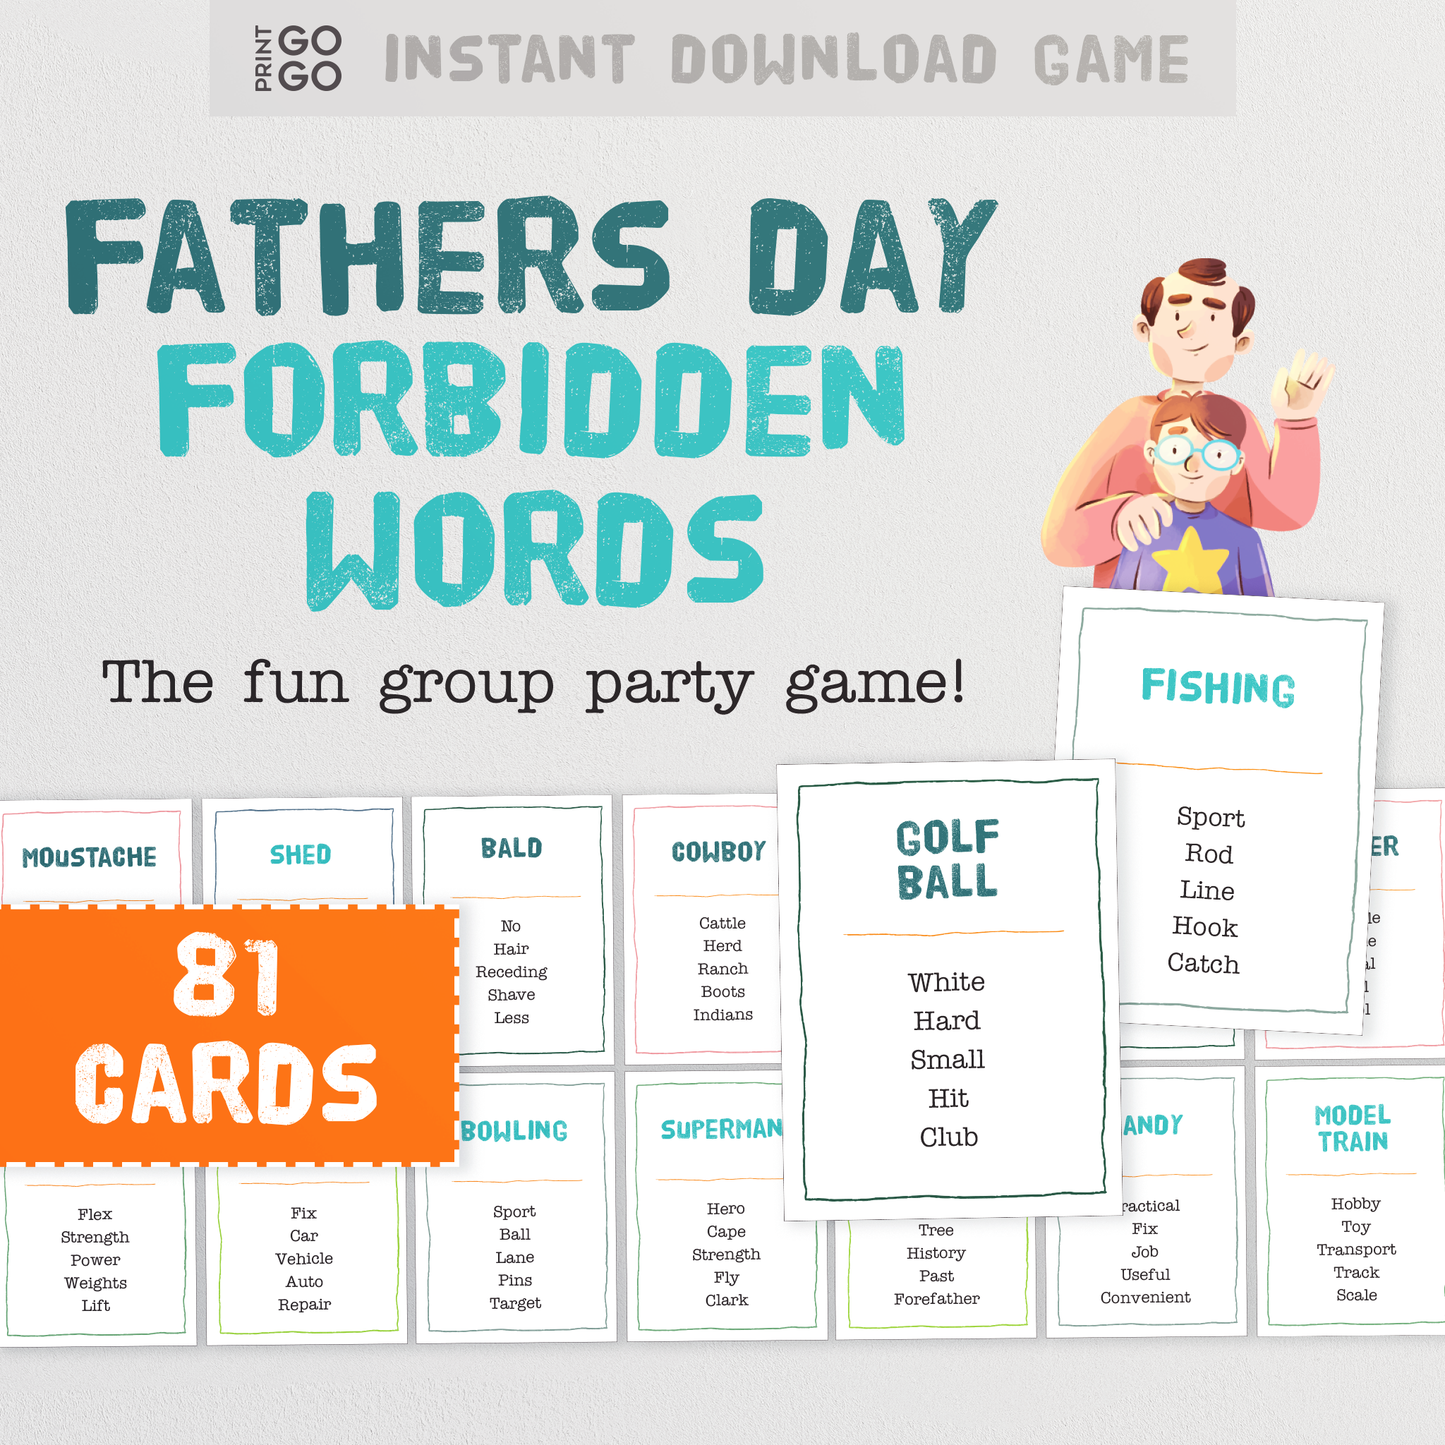 Father's Day Forbidden Words - The Fun Quick Thinking Group Party Game!